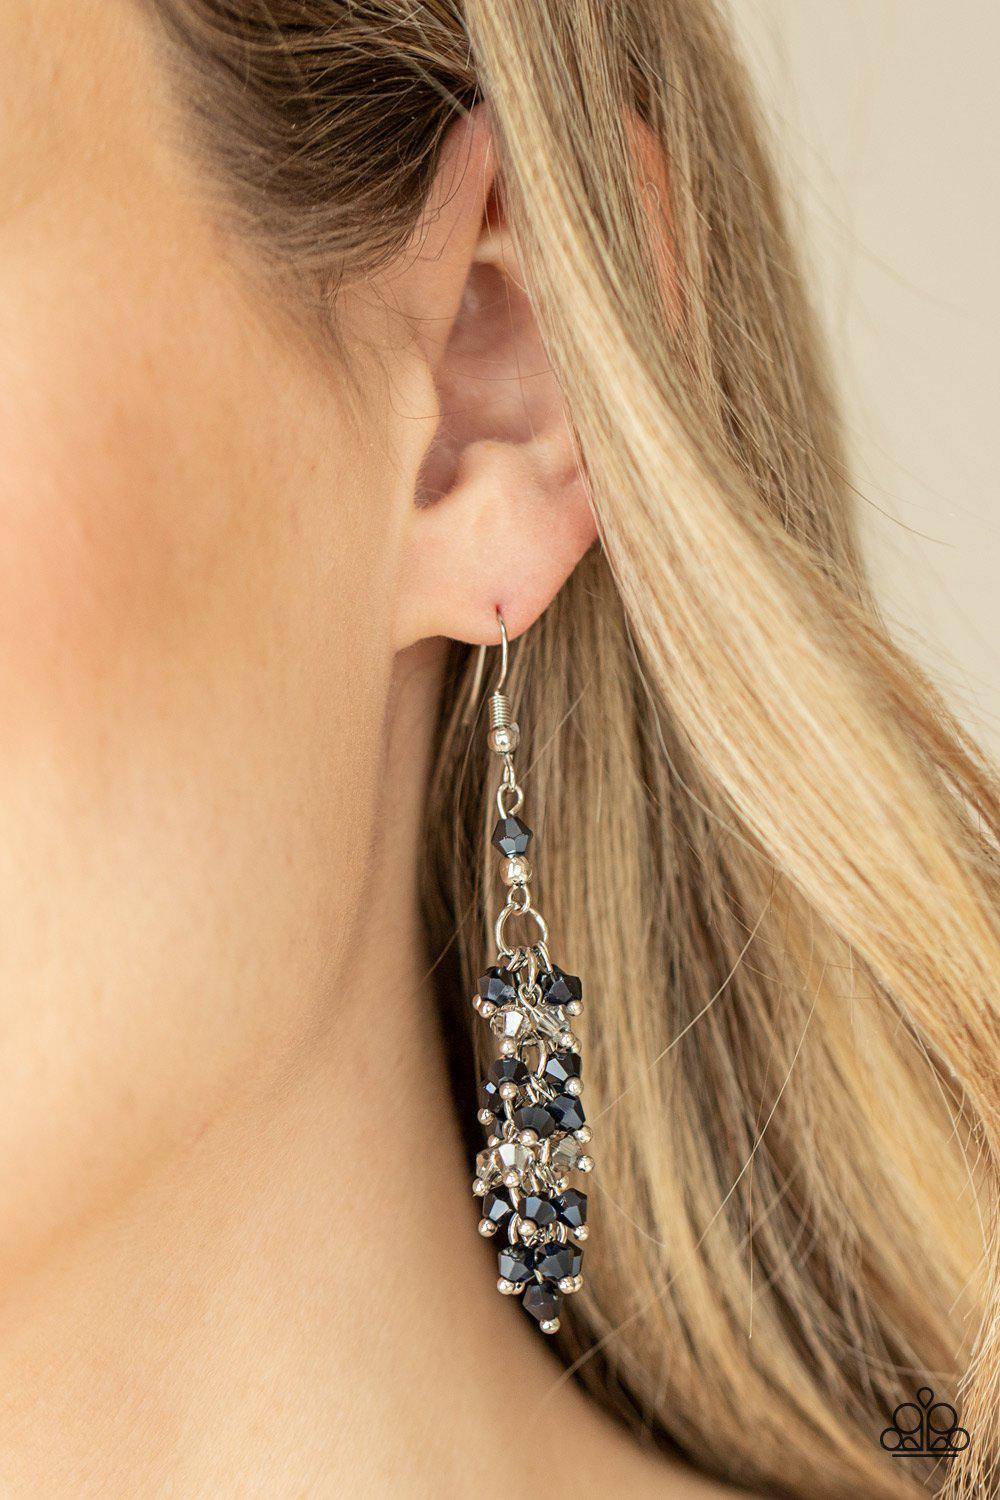 Celestial Chandeliers Blue Iridescent Earrings - Paparazzi Accessories- lightbox - CarasShop.com - $5 Jewelry by Cara Jewels